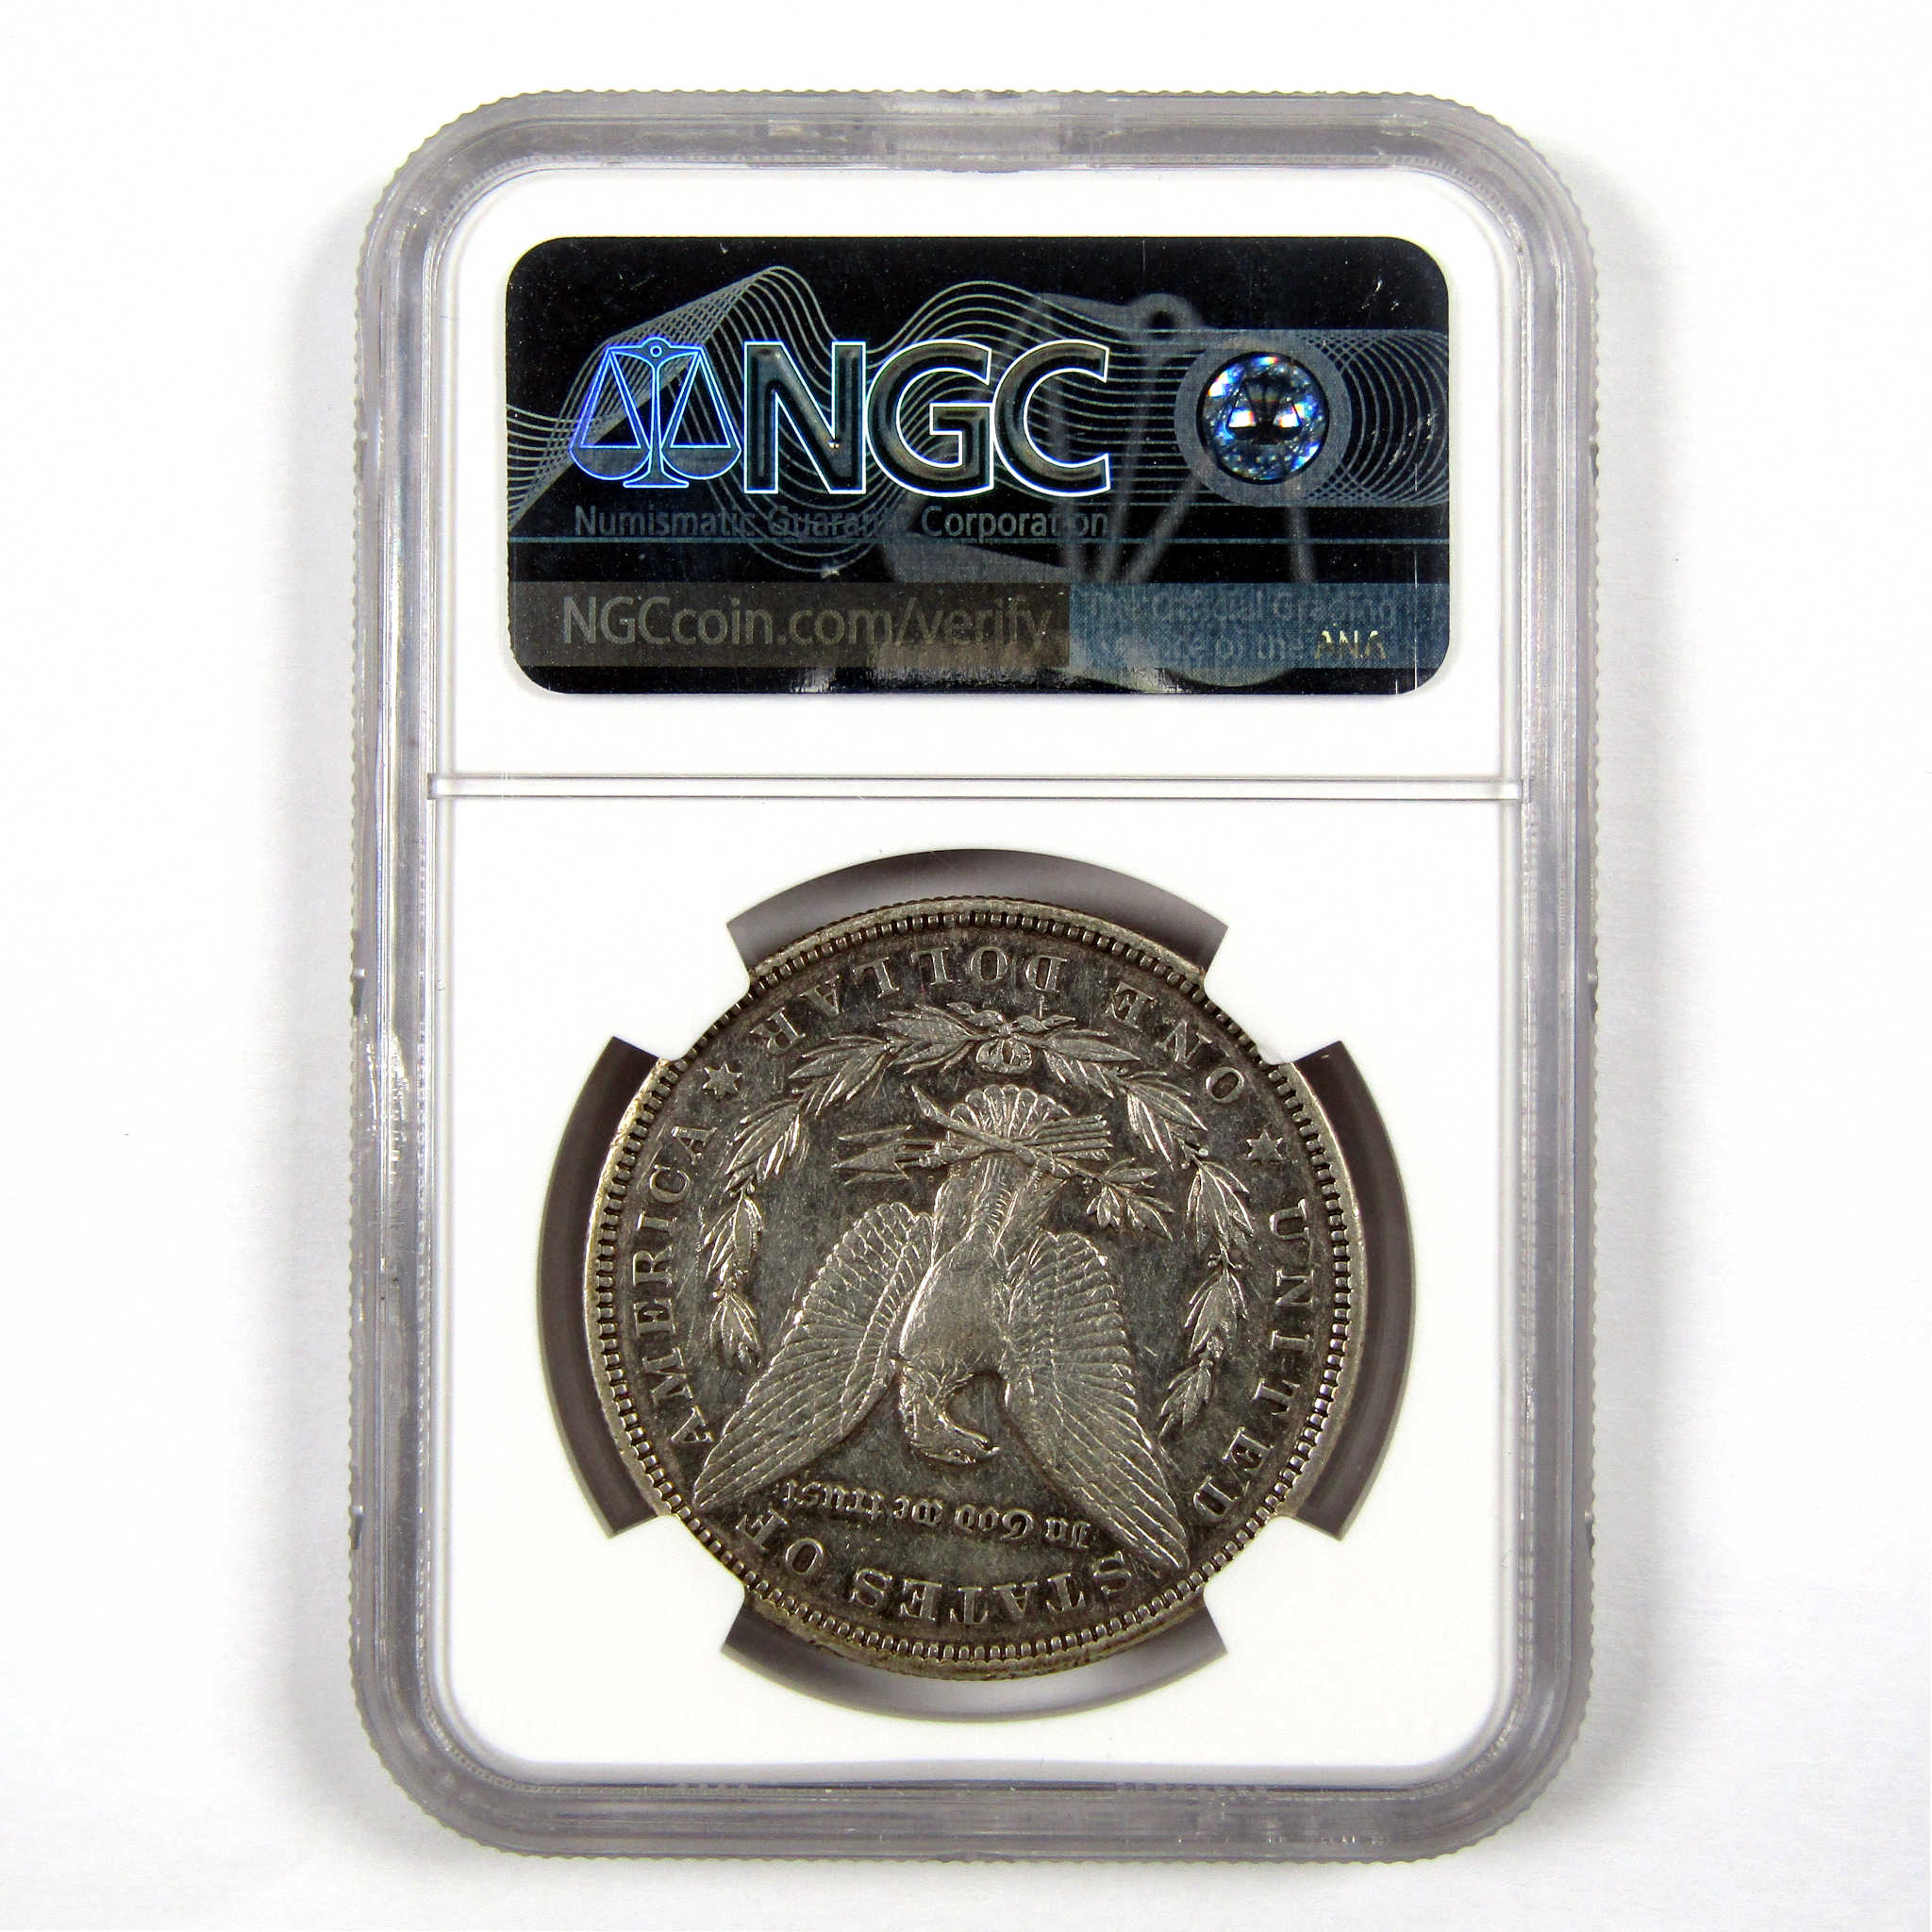 1886 Morgan Dollar PF 45 NGC 90% Silver $1 Proof Coin SKU:I9178 - Morgan coin - Morgan silver dollar - Morgan silver dollar for sale - Profile Coins &amp; Collectibles